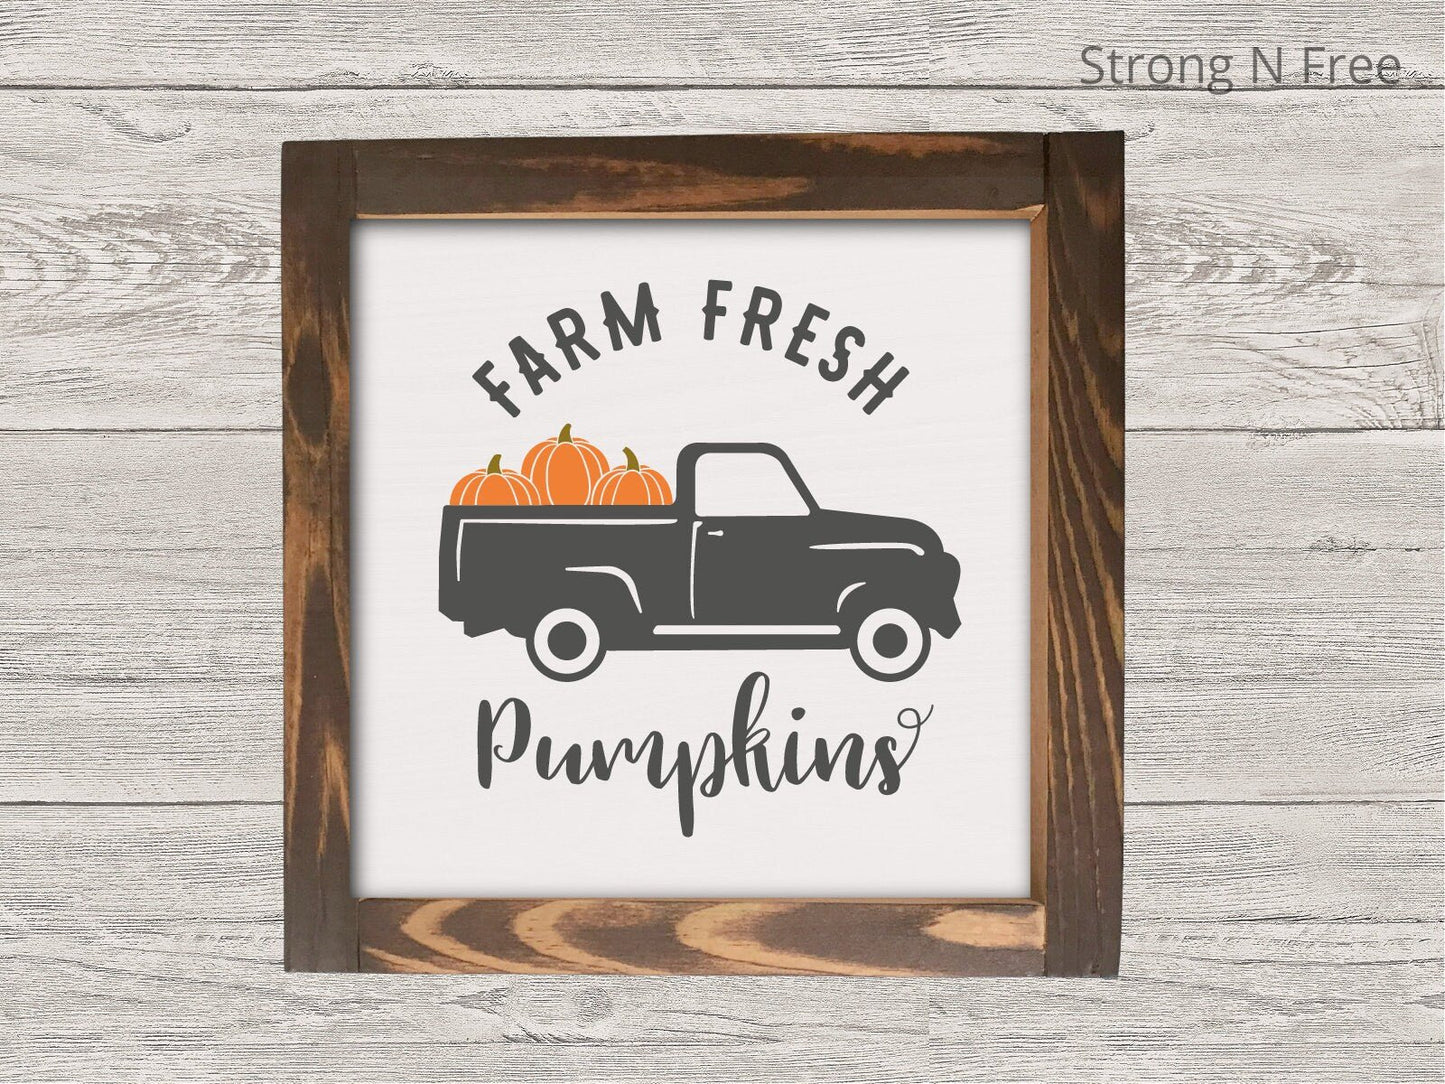 Fall Mini Sign Collection 6"x6" Farmhouse Style Tiered Tray Sign. Tiered Tray Decor, Coffee Bar Sign, Thanksgiving Decor, Framed Mini Sign